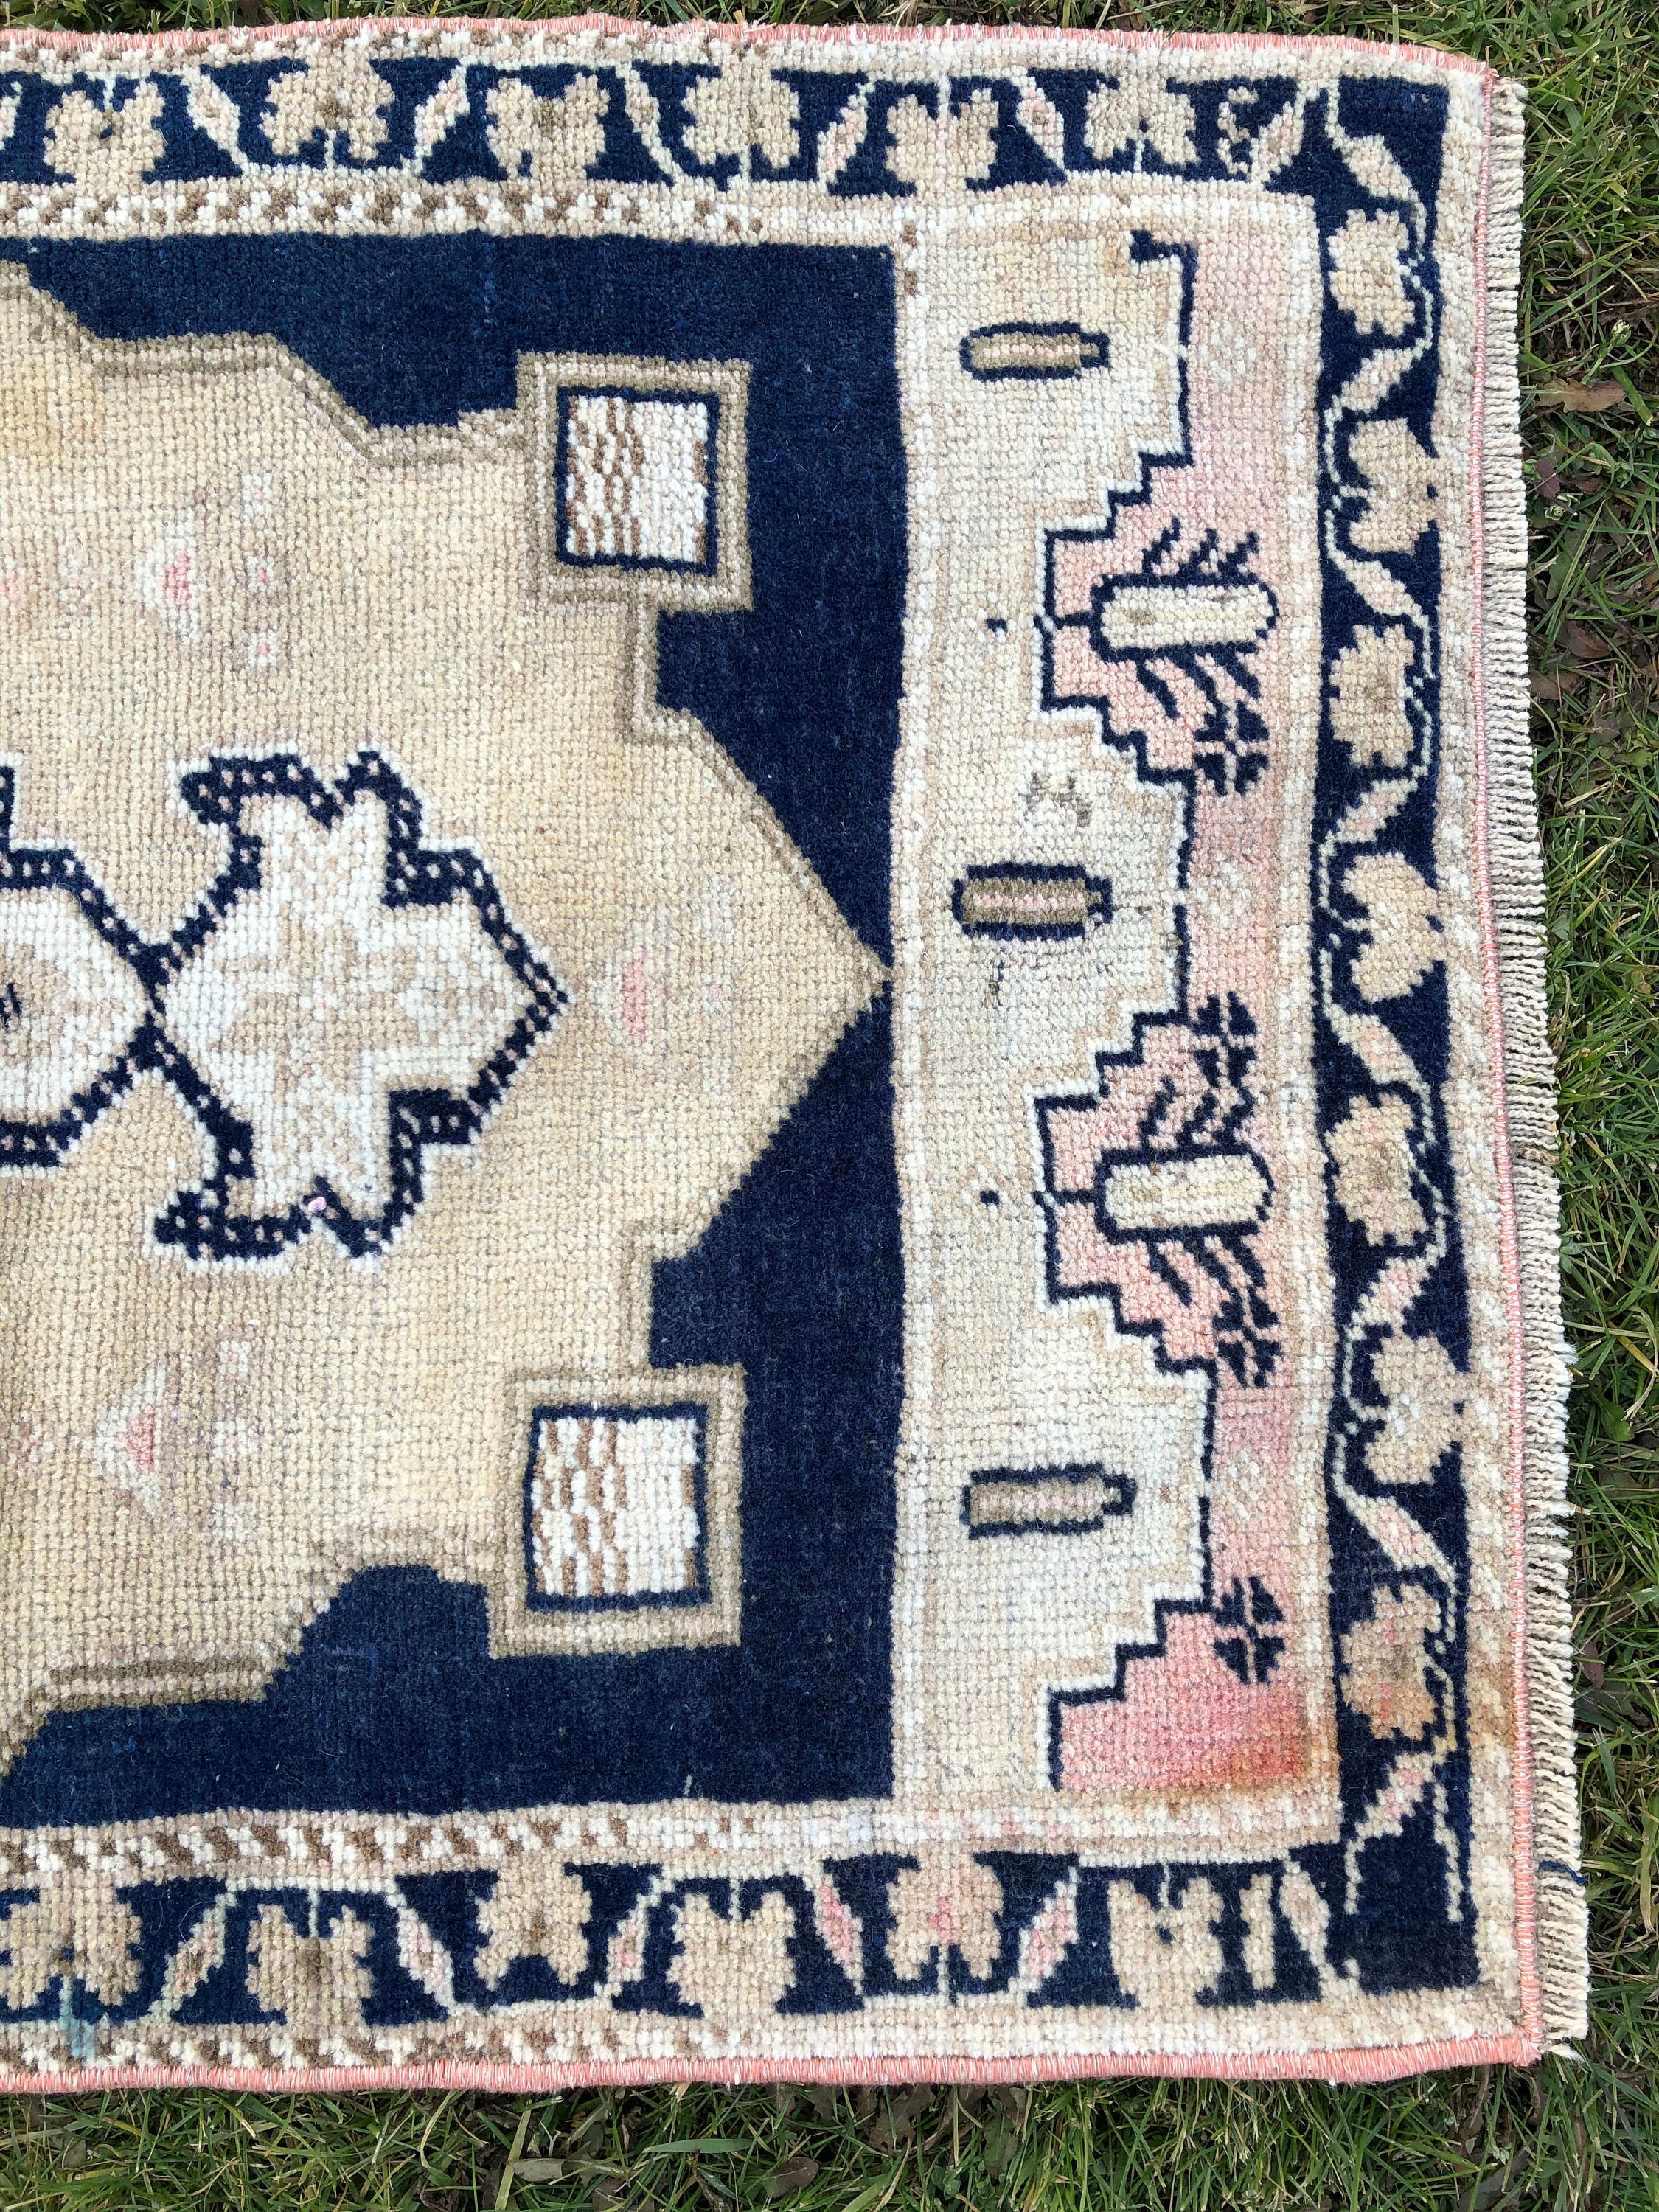 Pair of Turkish Rugs, Set of Rugs, Twin Rug, Matching Rugs, Bathroom Rug  and Mat Set, Mini Oushak Rug, Small Kitchen Runner, 2x3 Vintage Rug 